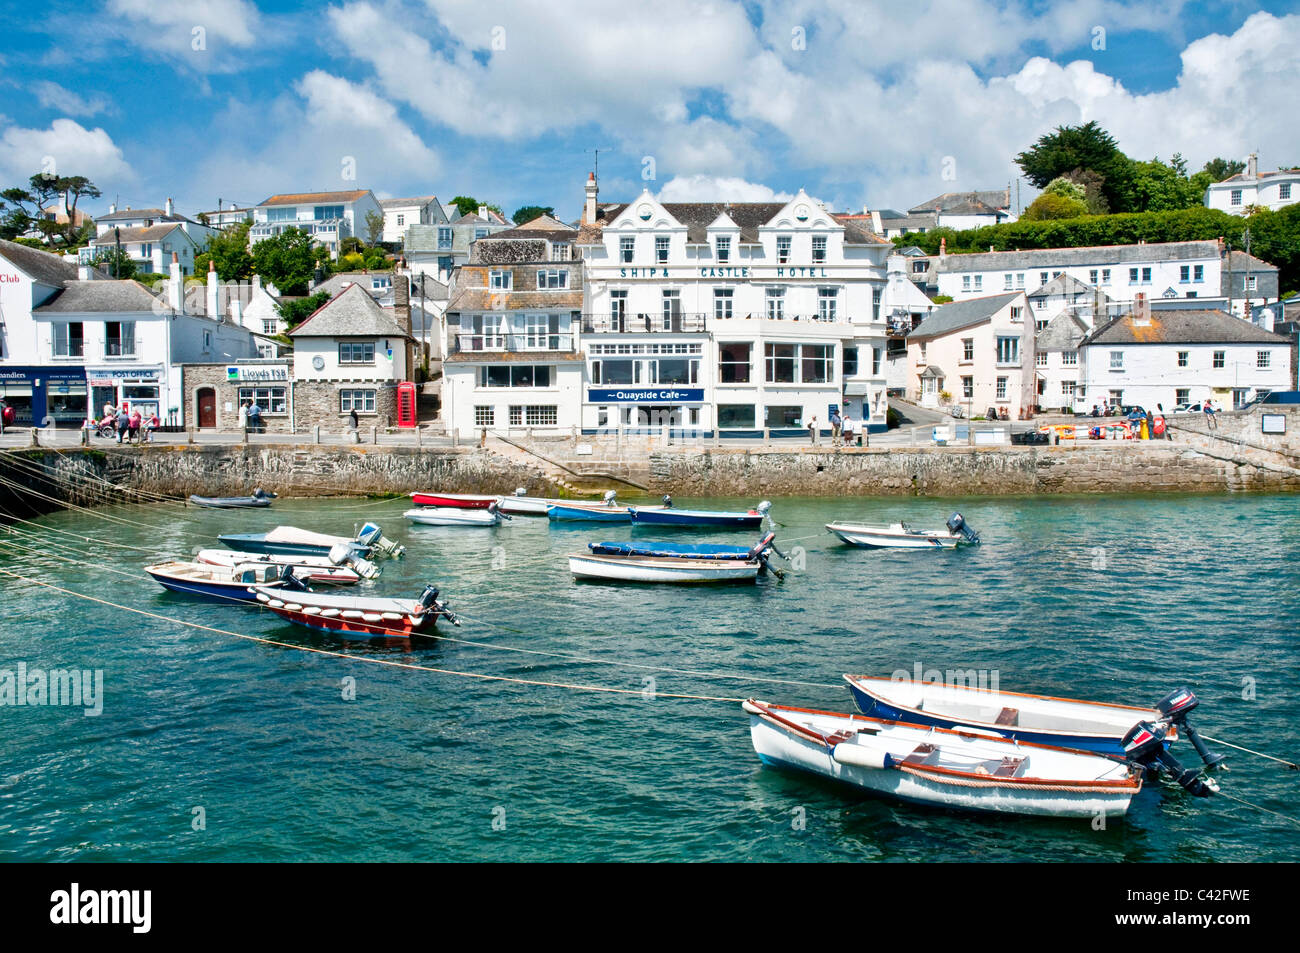 Boats in the harbour at St Mawes Cornwall England Stock Photo